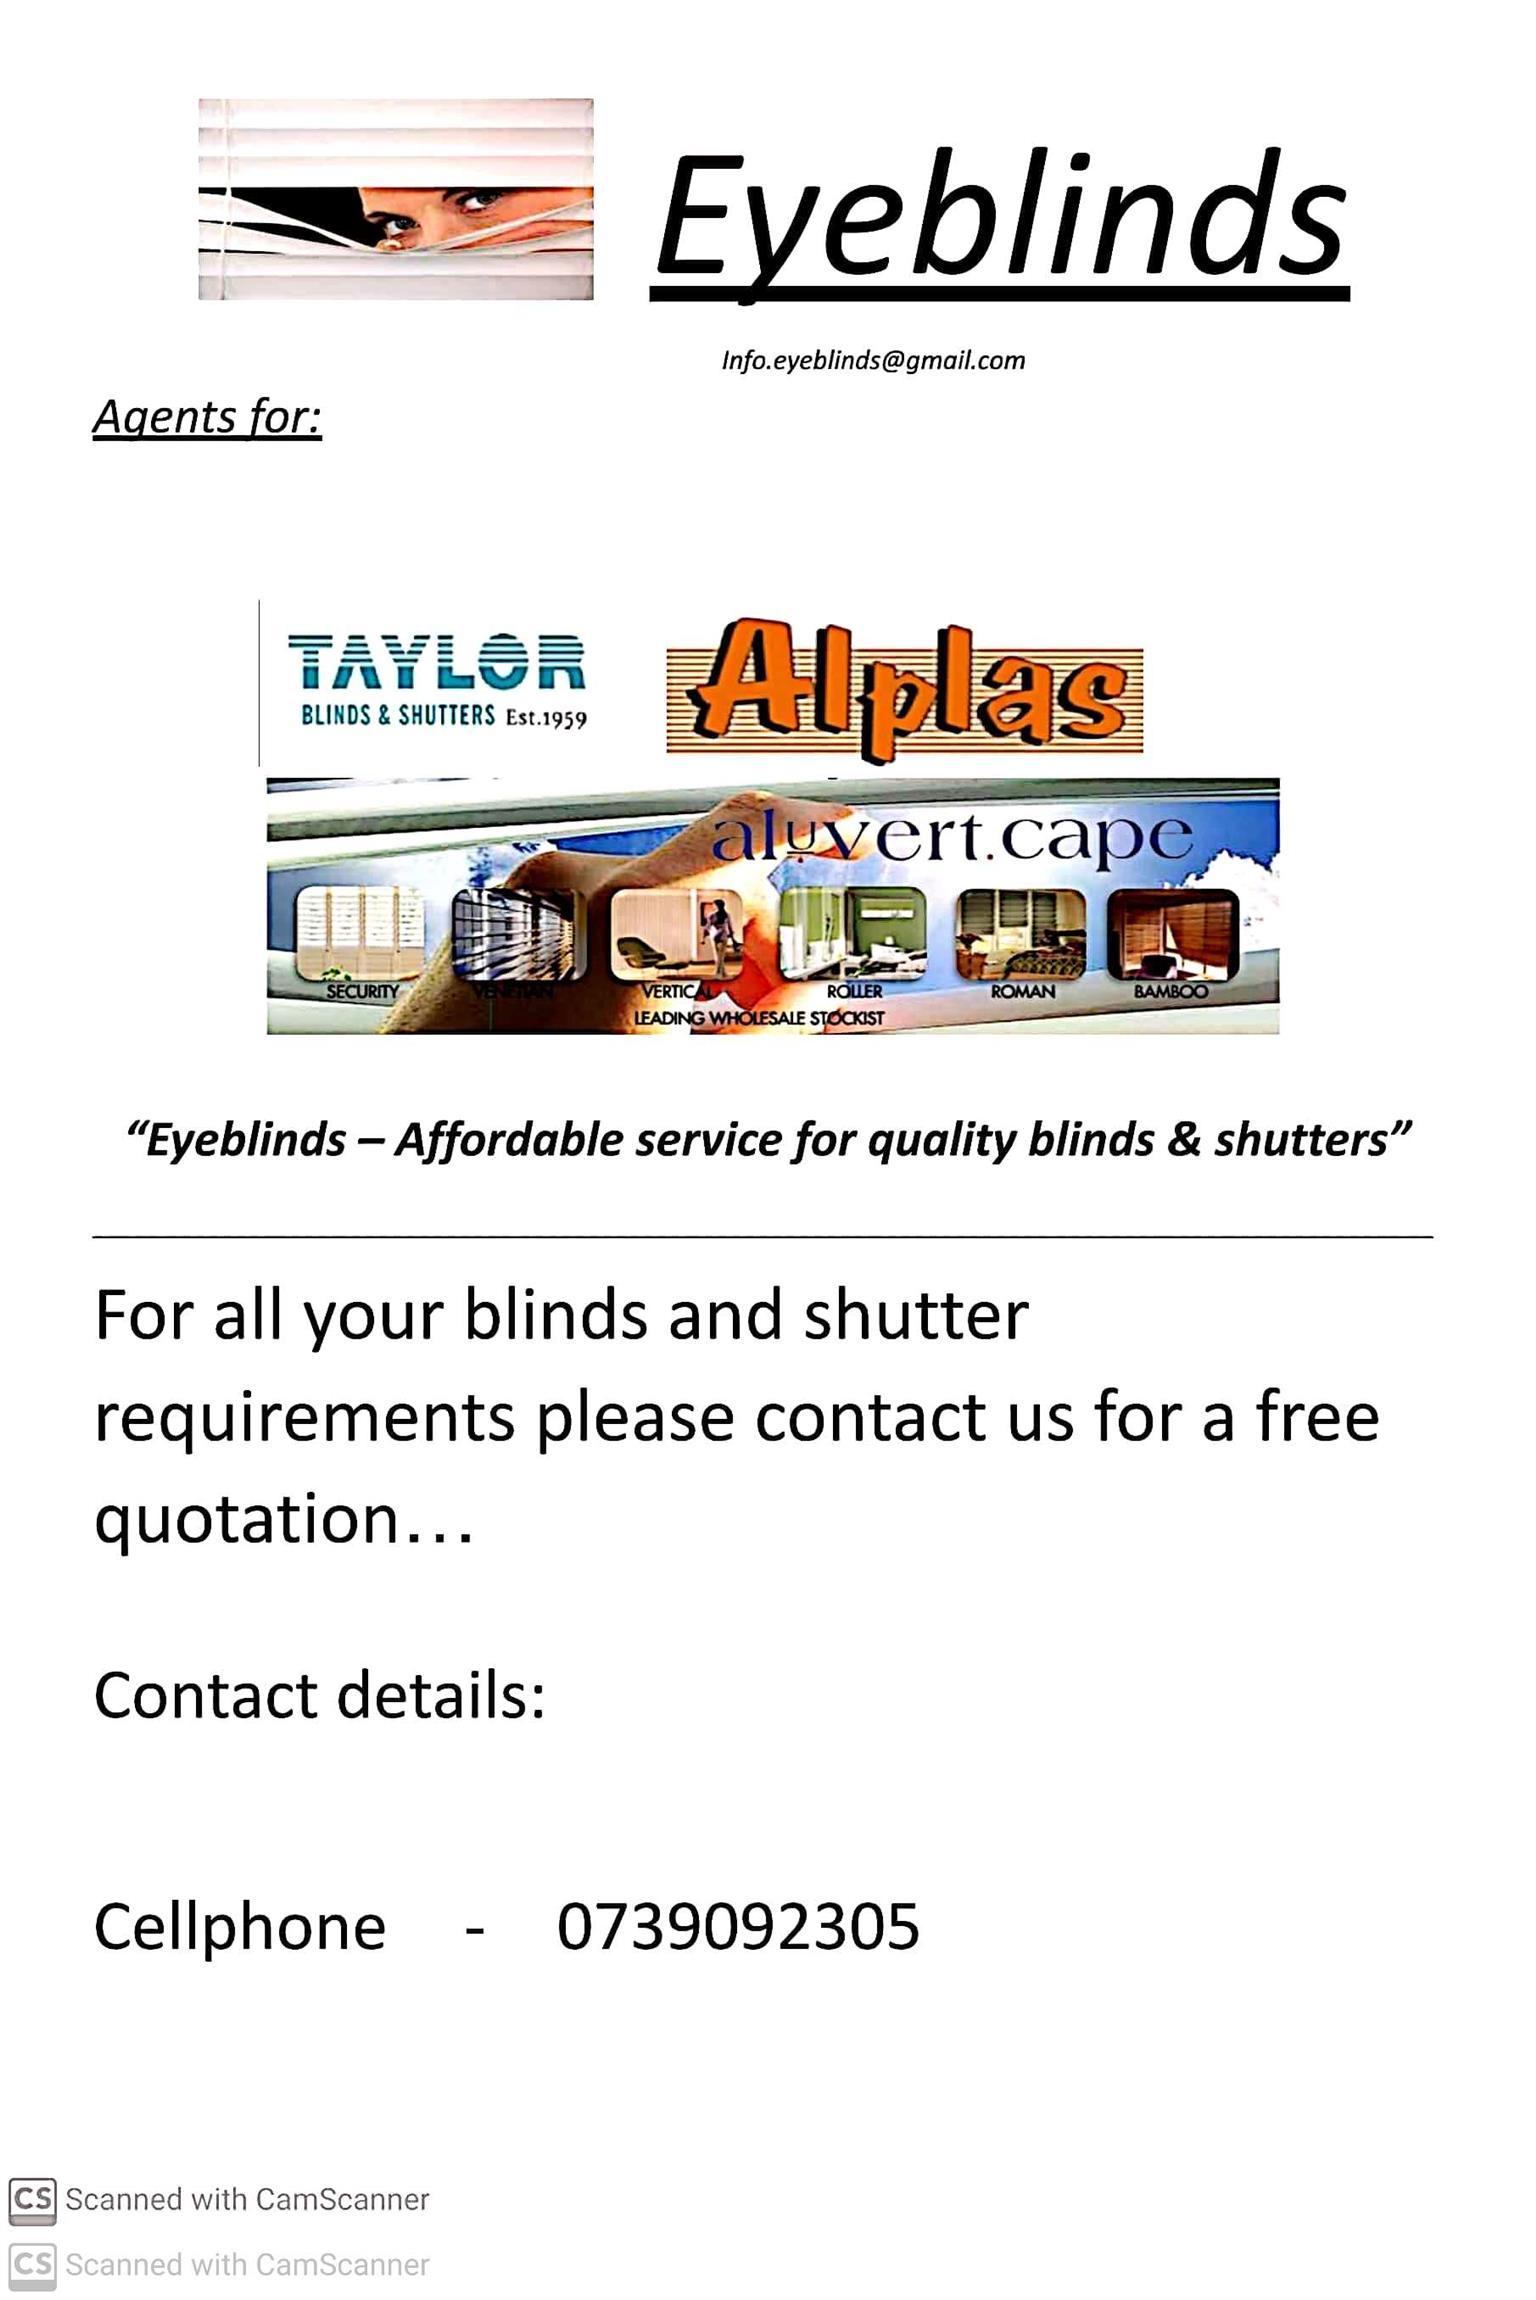 We specialize in the supply and installation of the highest quality window blind